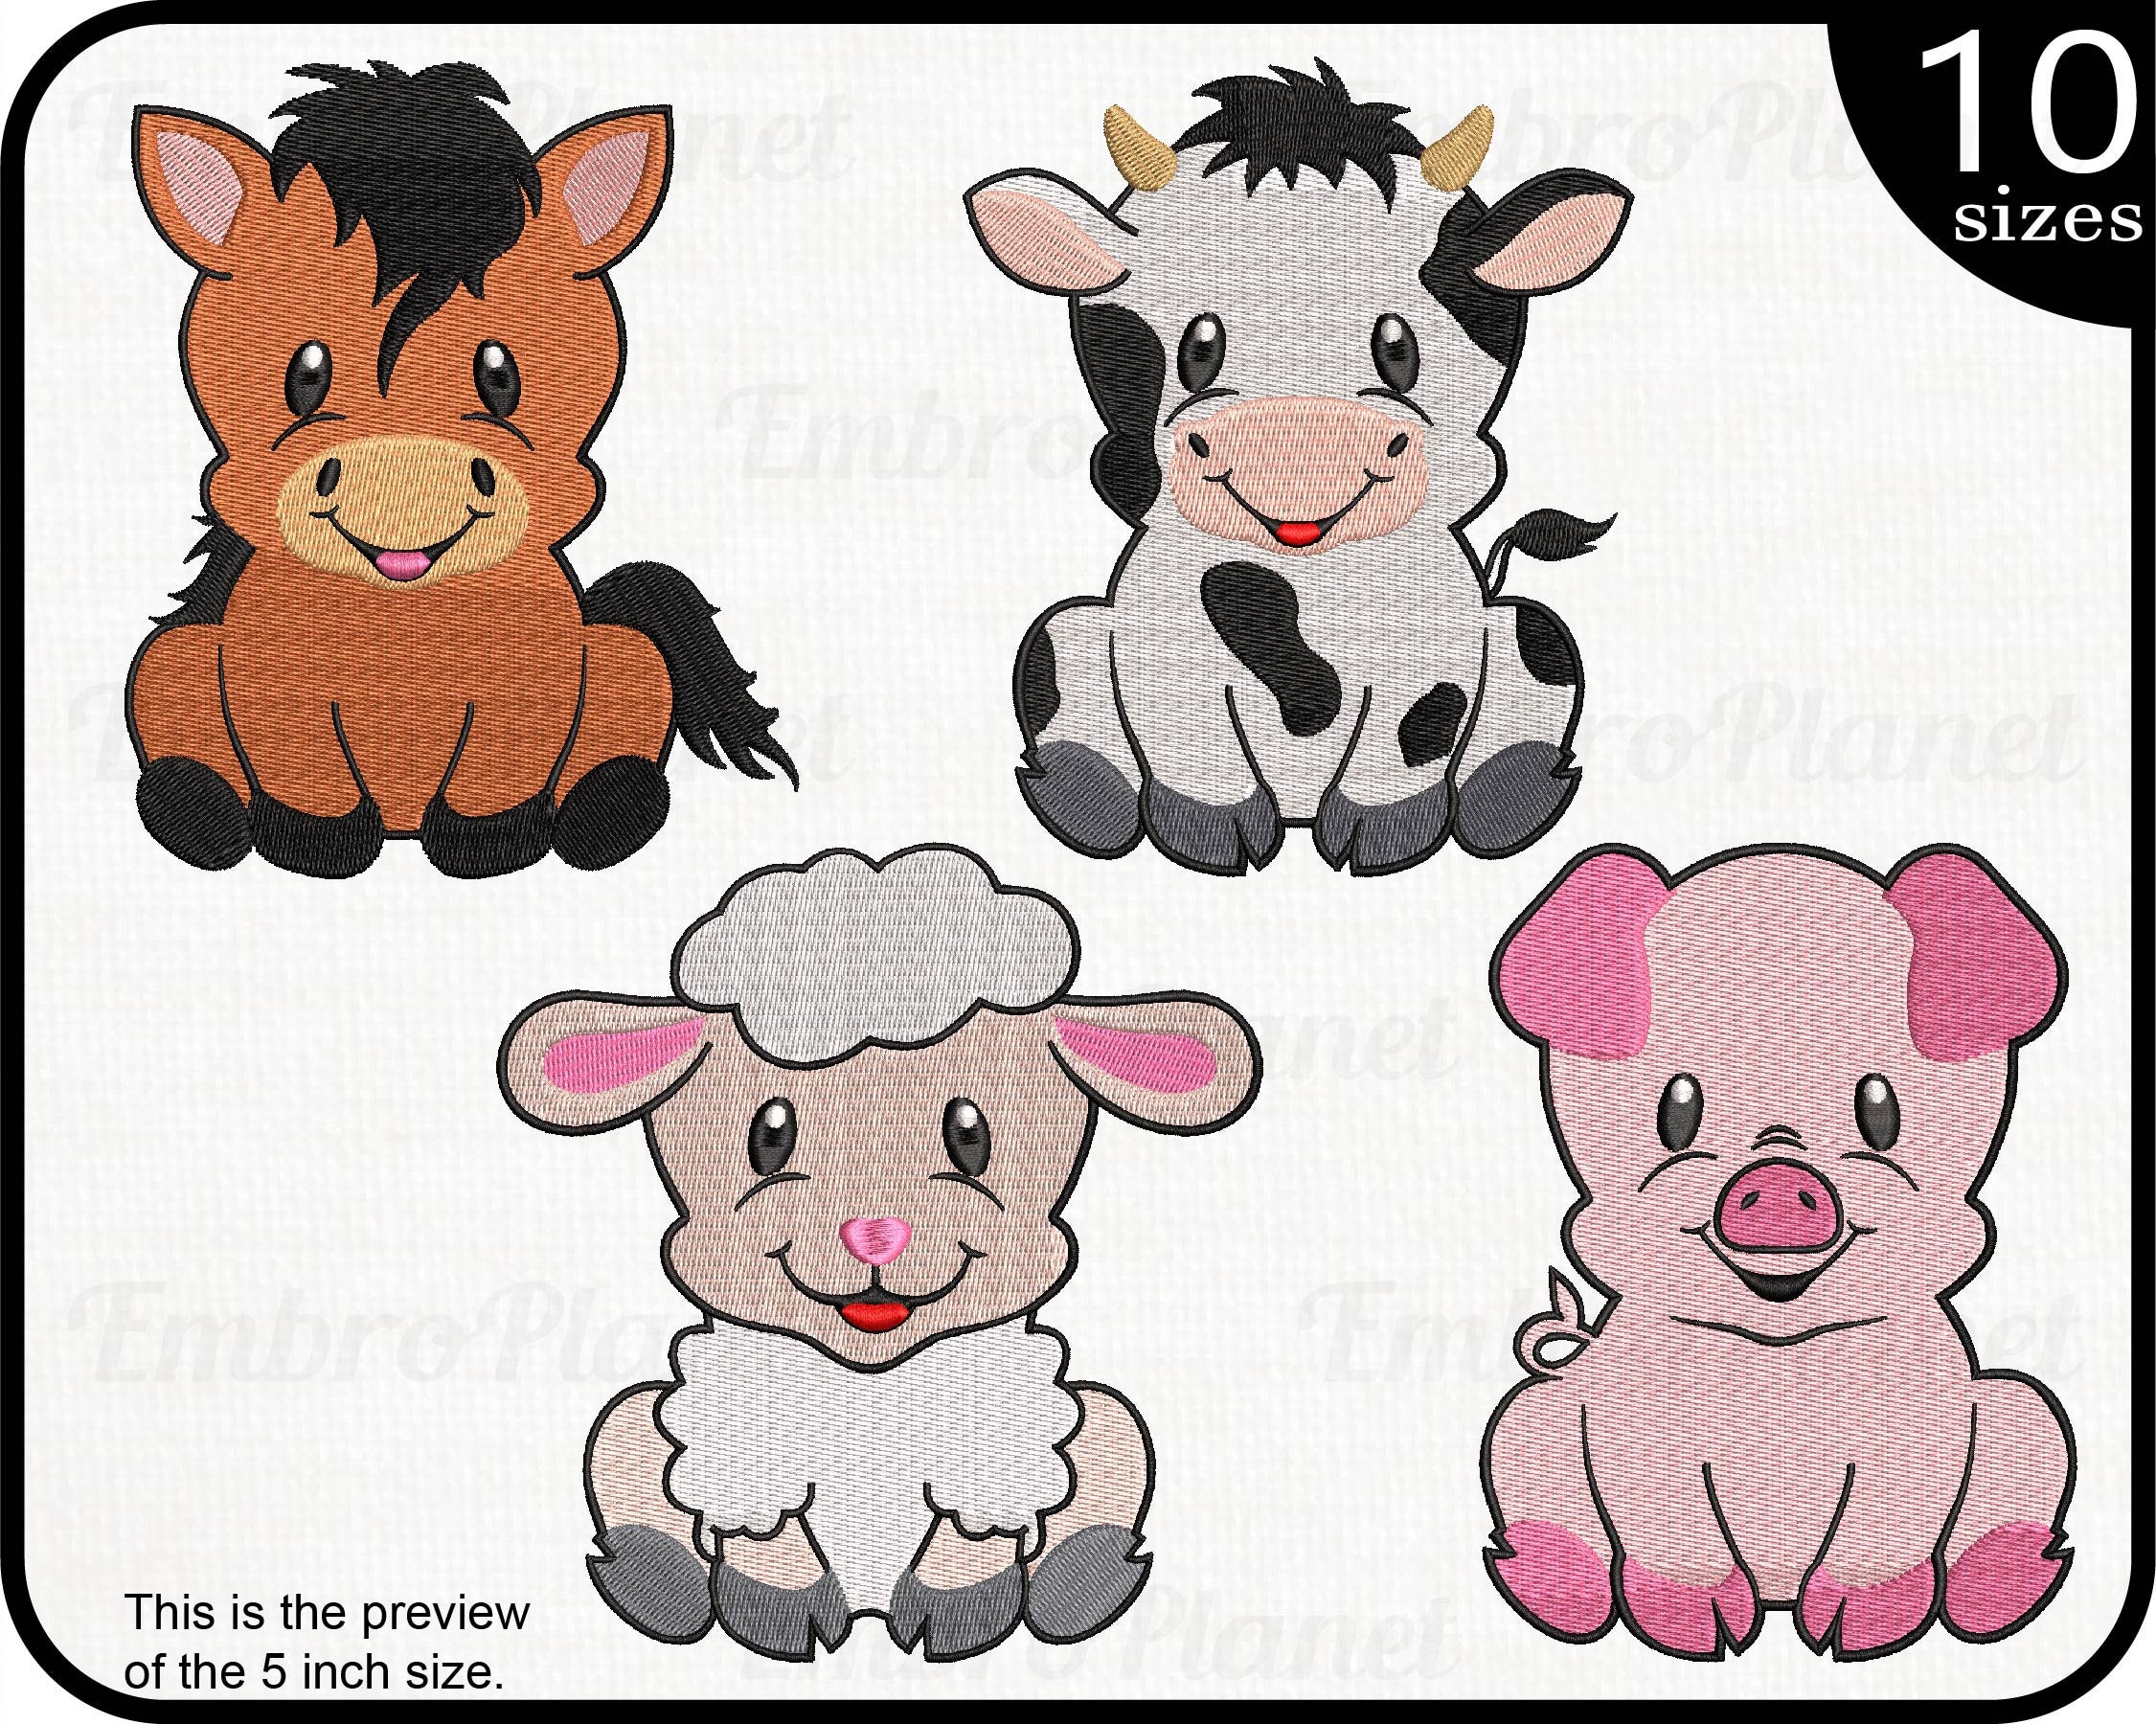 Pictiruesque Cartoon Animals Embroidery Kit for Kids